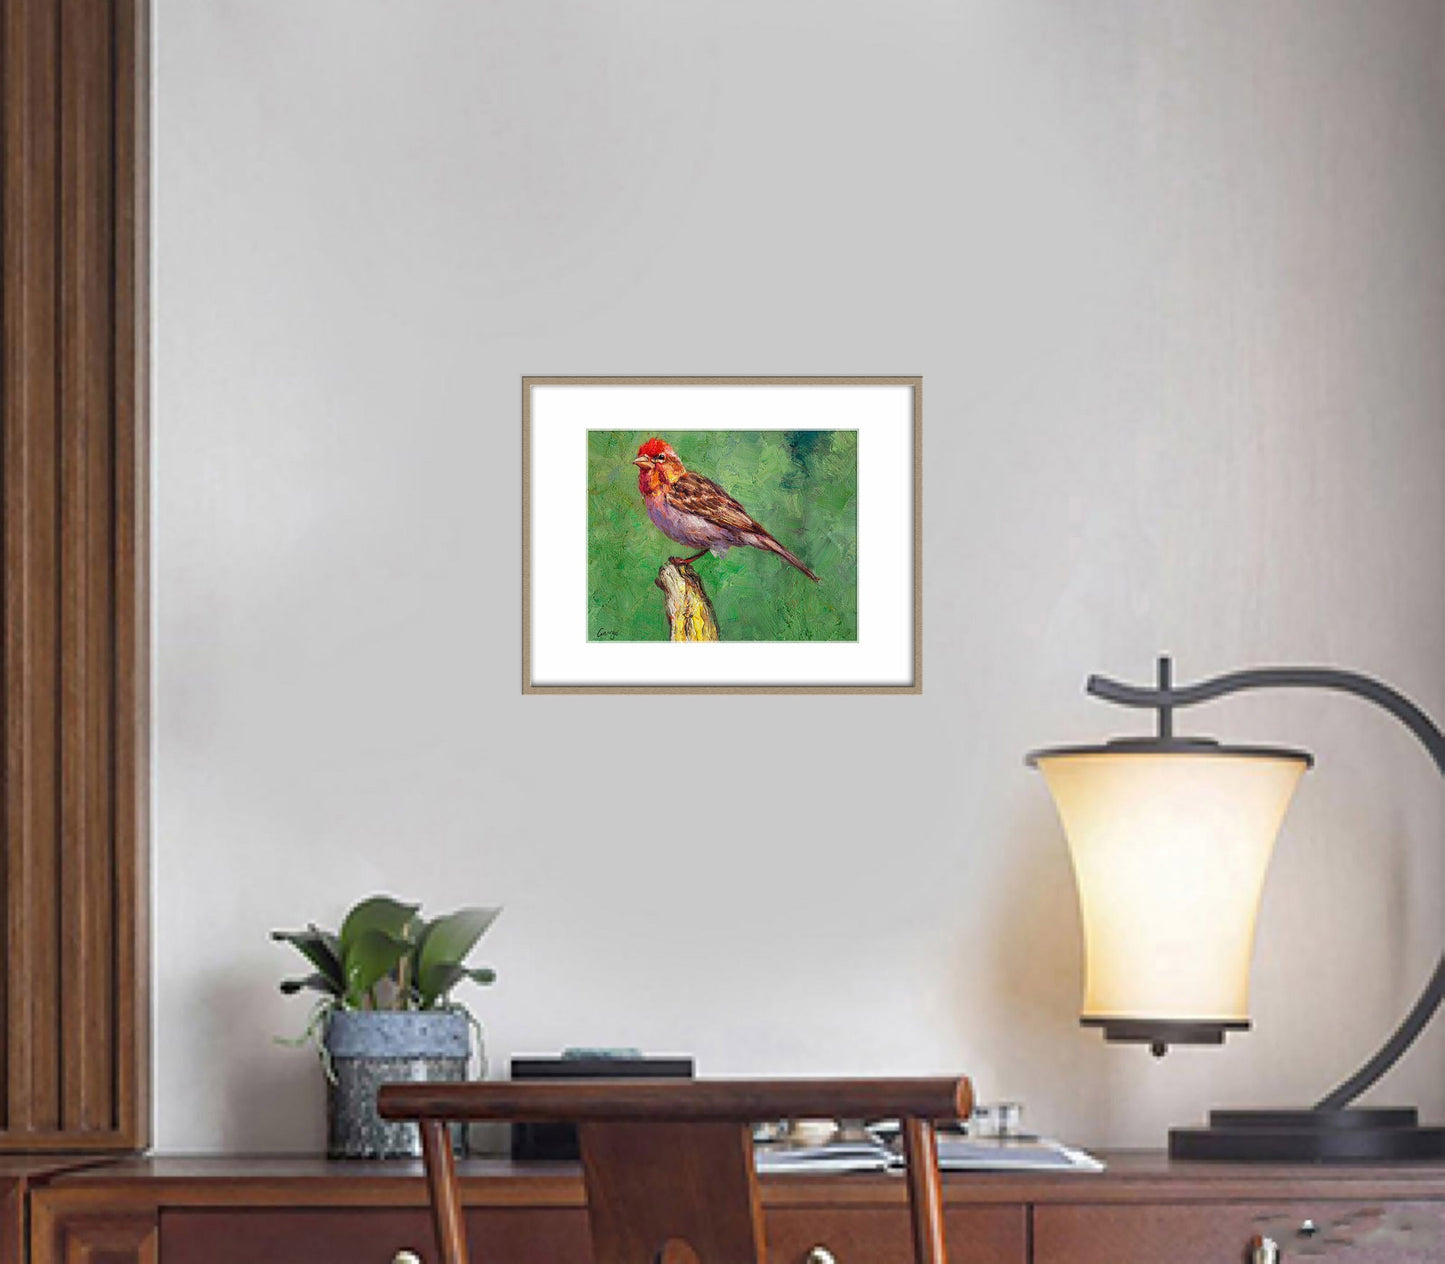 Oil Painting House Finch Bird Artwork, Contemporary Art, Living Room Wall Decor, Painting Abstract, Canvas Wall Decor, Original Painting